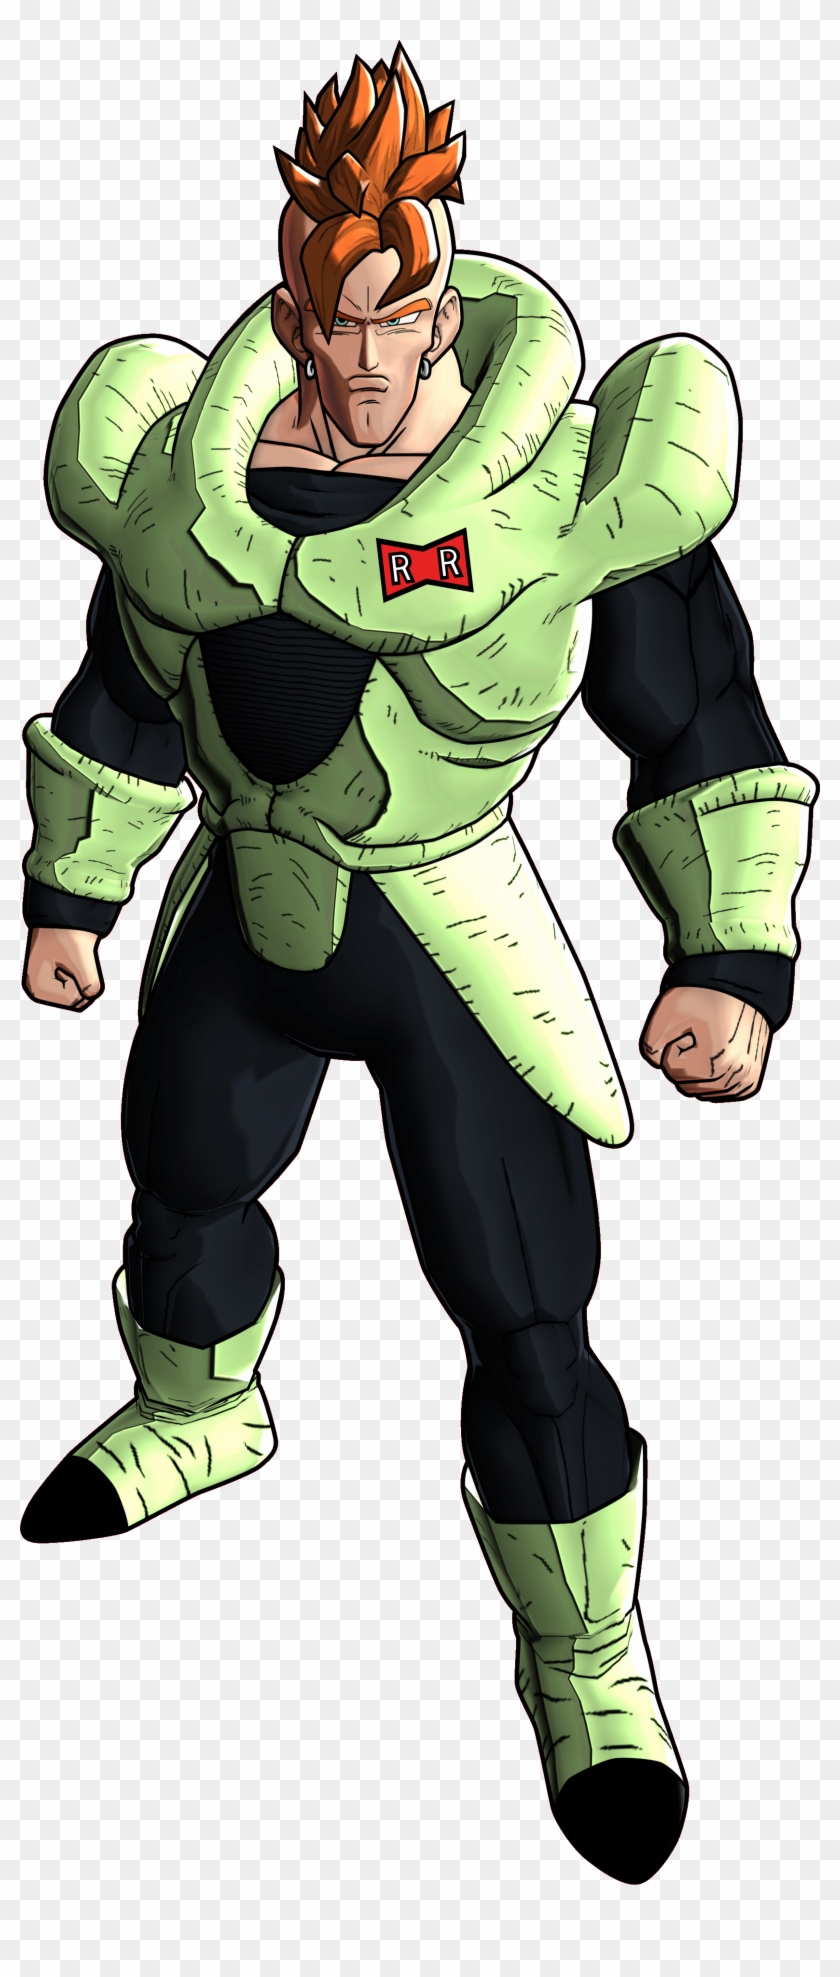 Android16 Battle Of Z Render - Dragon Ball Fighterz Render Clipart #1986115